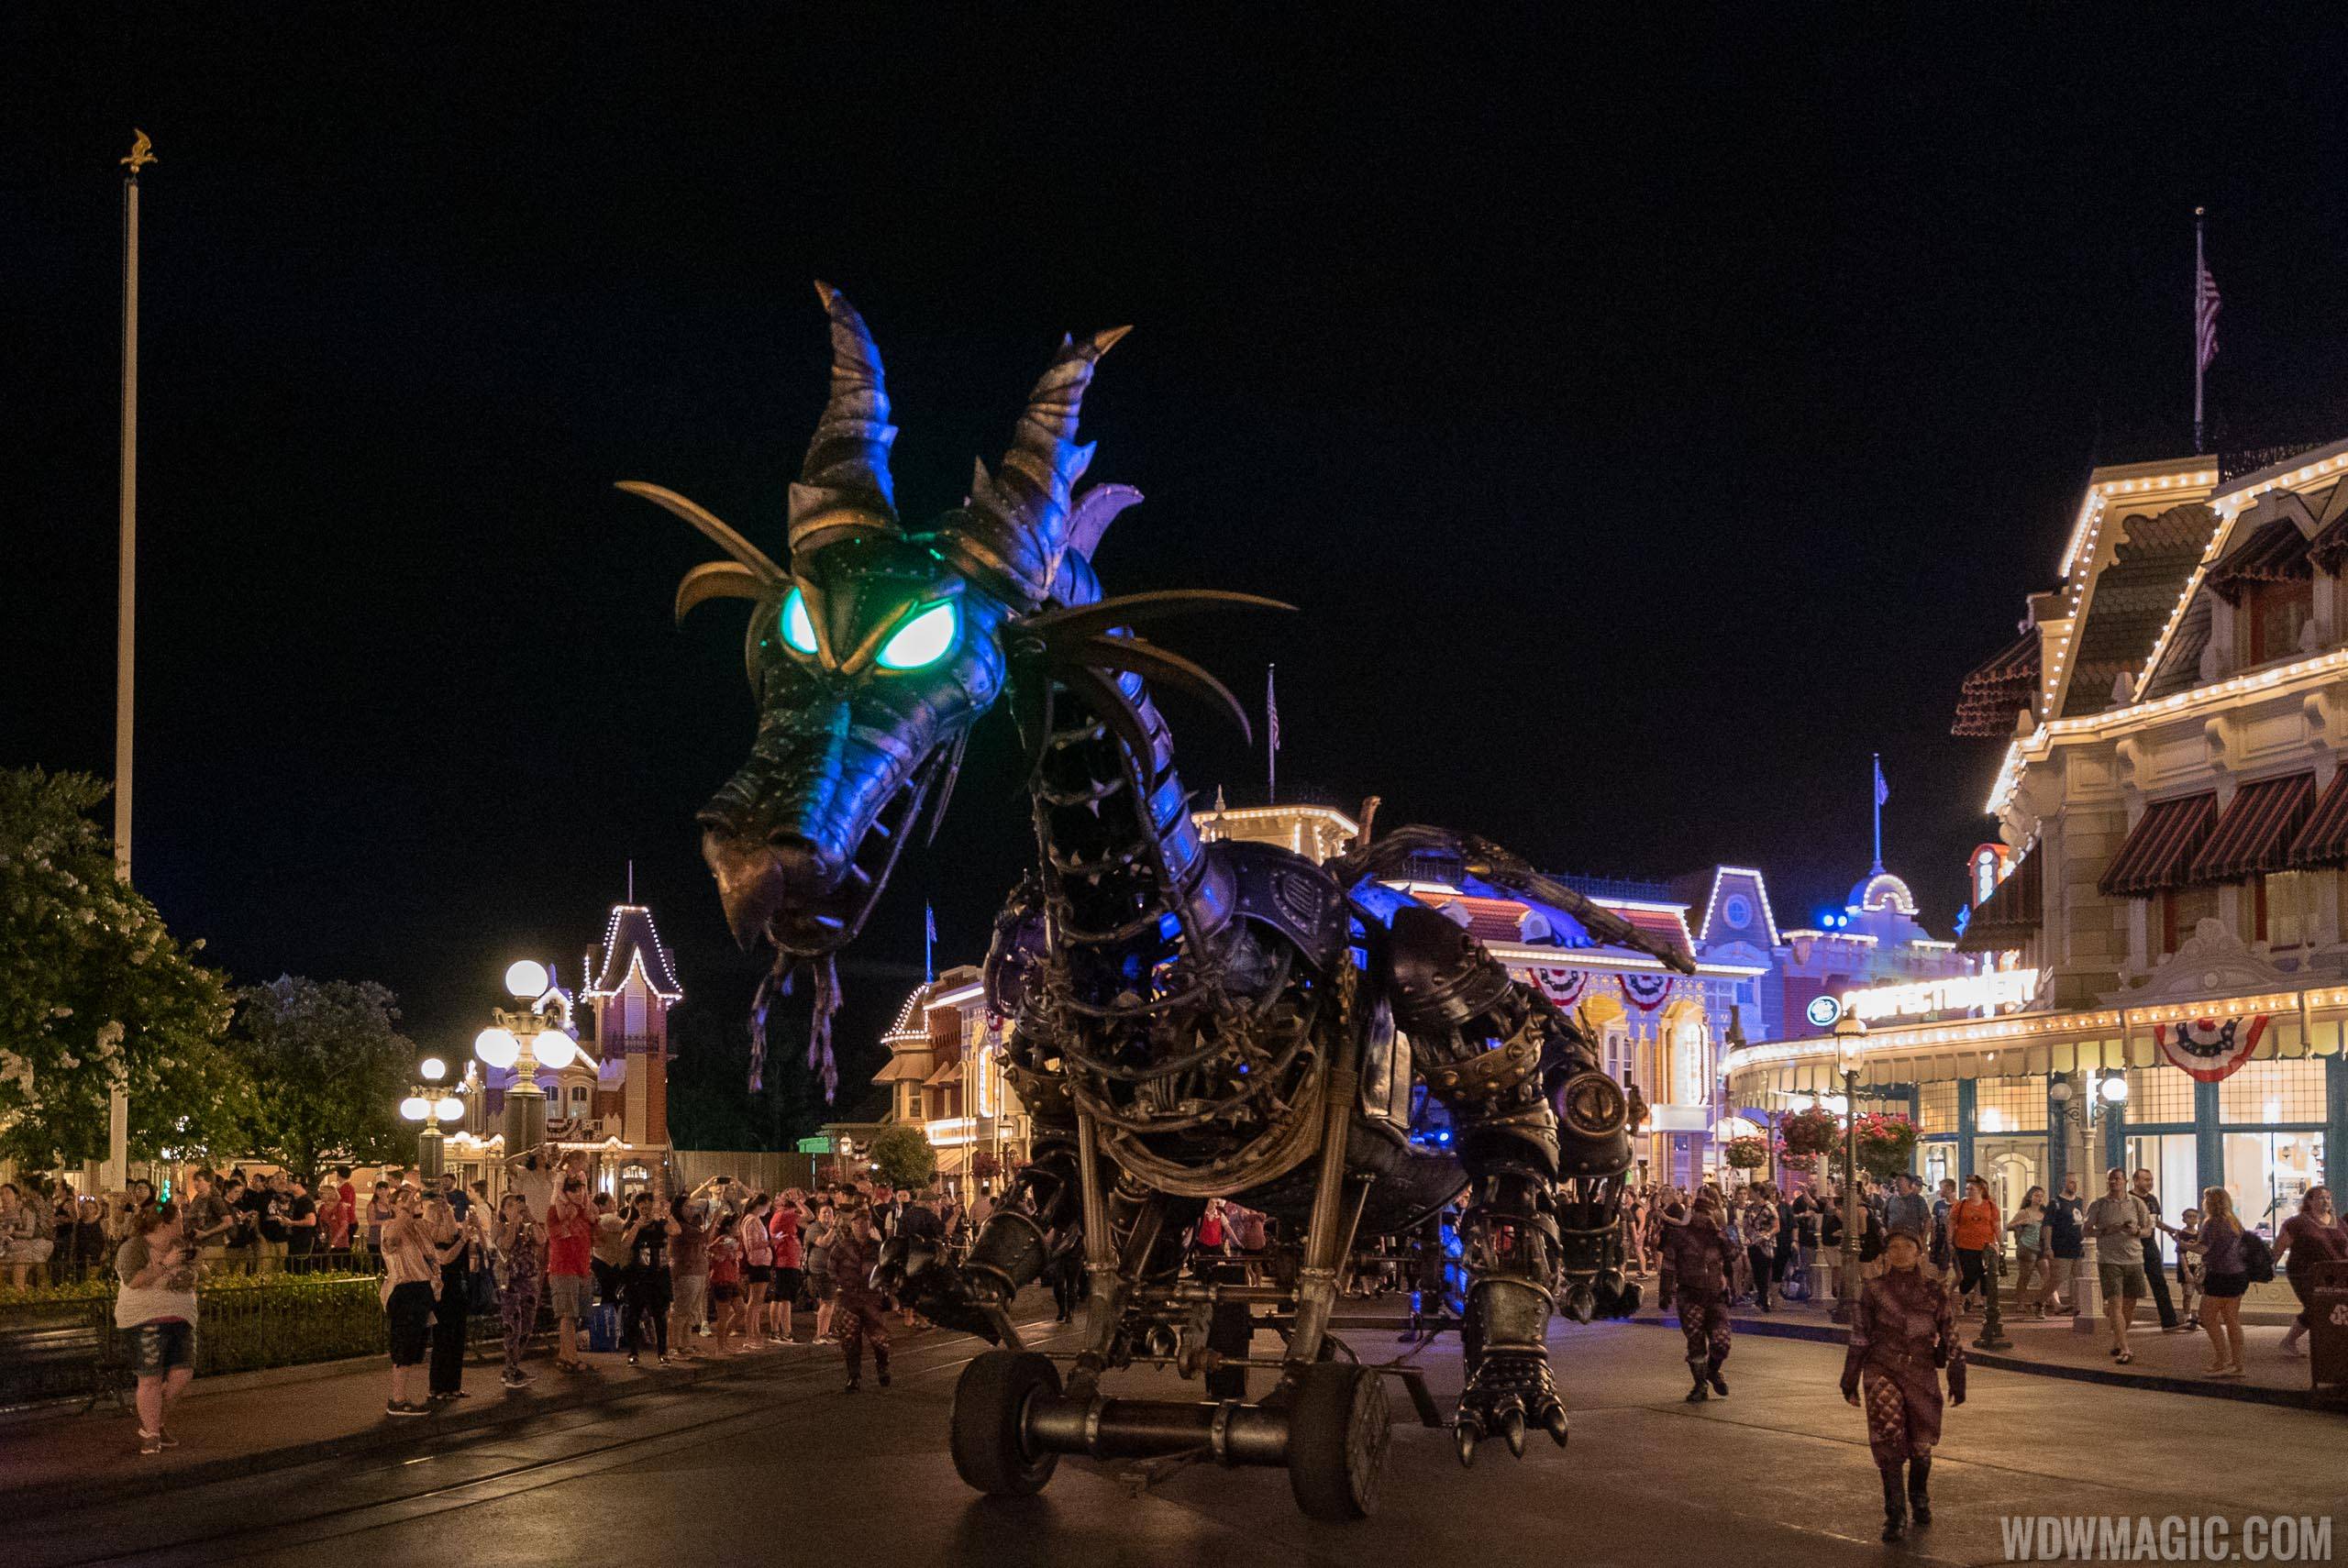 Maleficent at night during Disney Villains After Hours